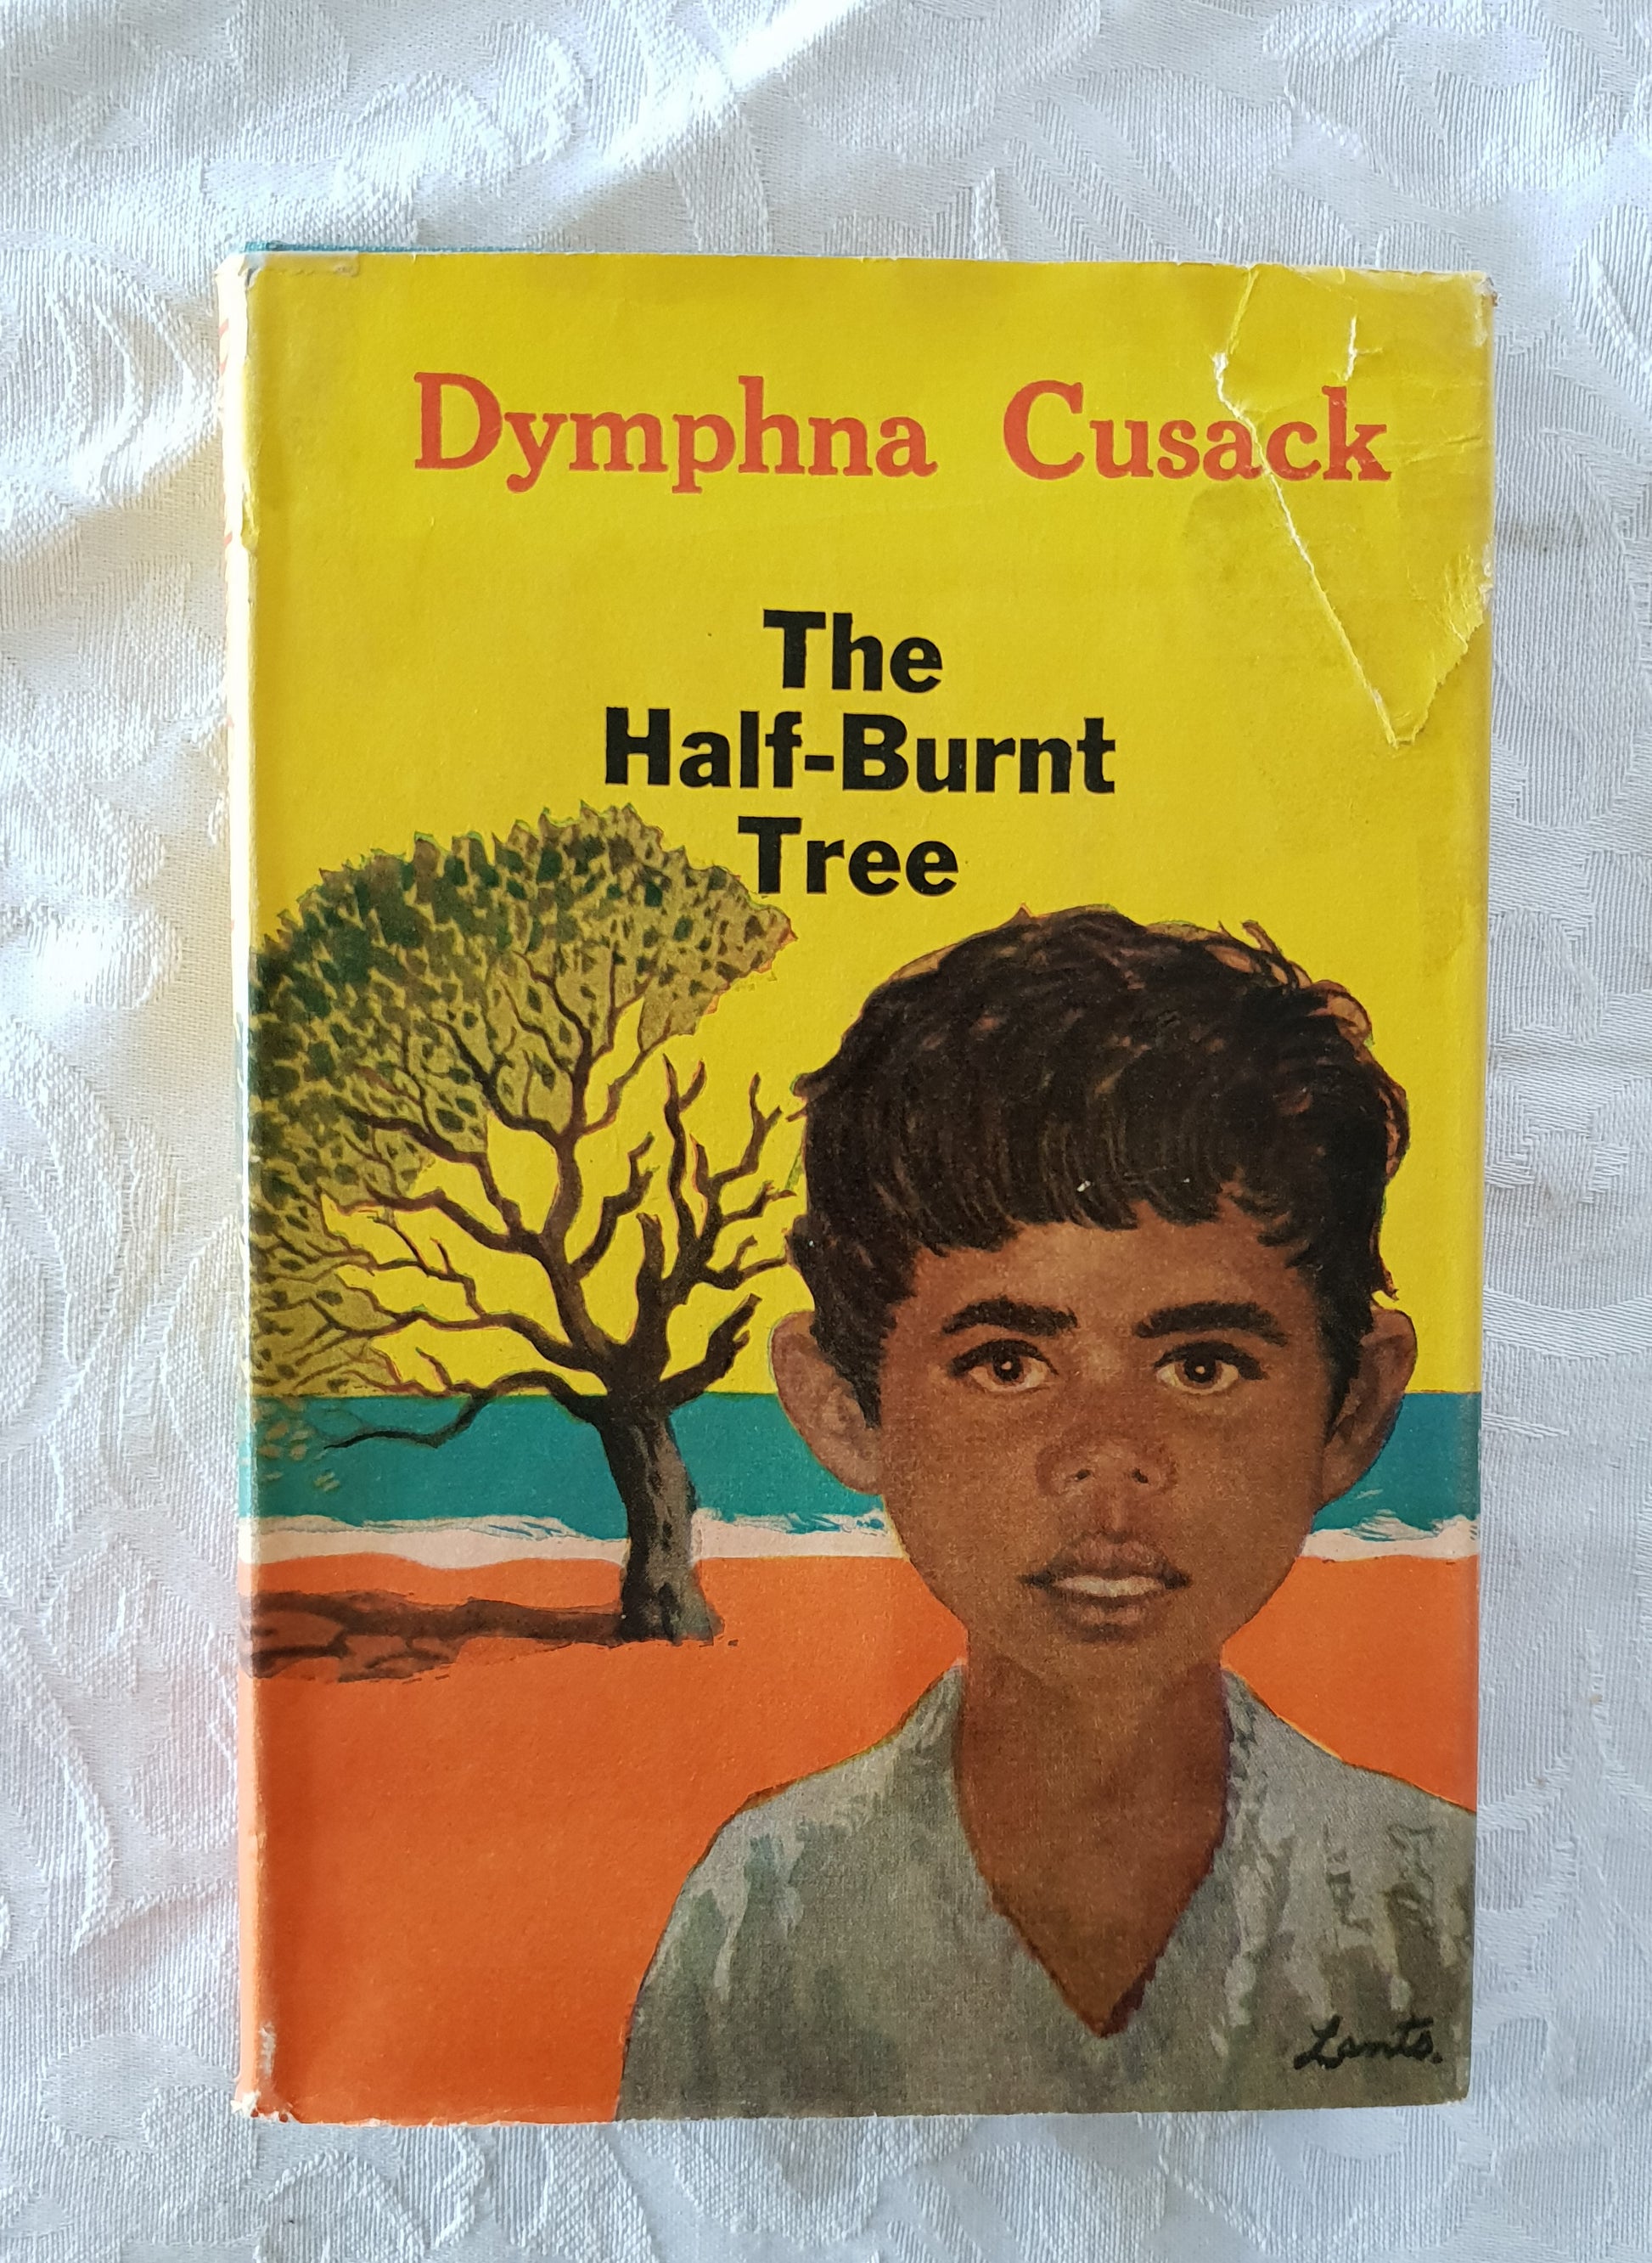 The Half-Burnt Tree  by Dymphna Cusack